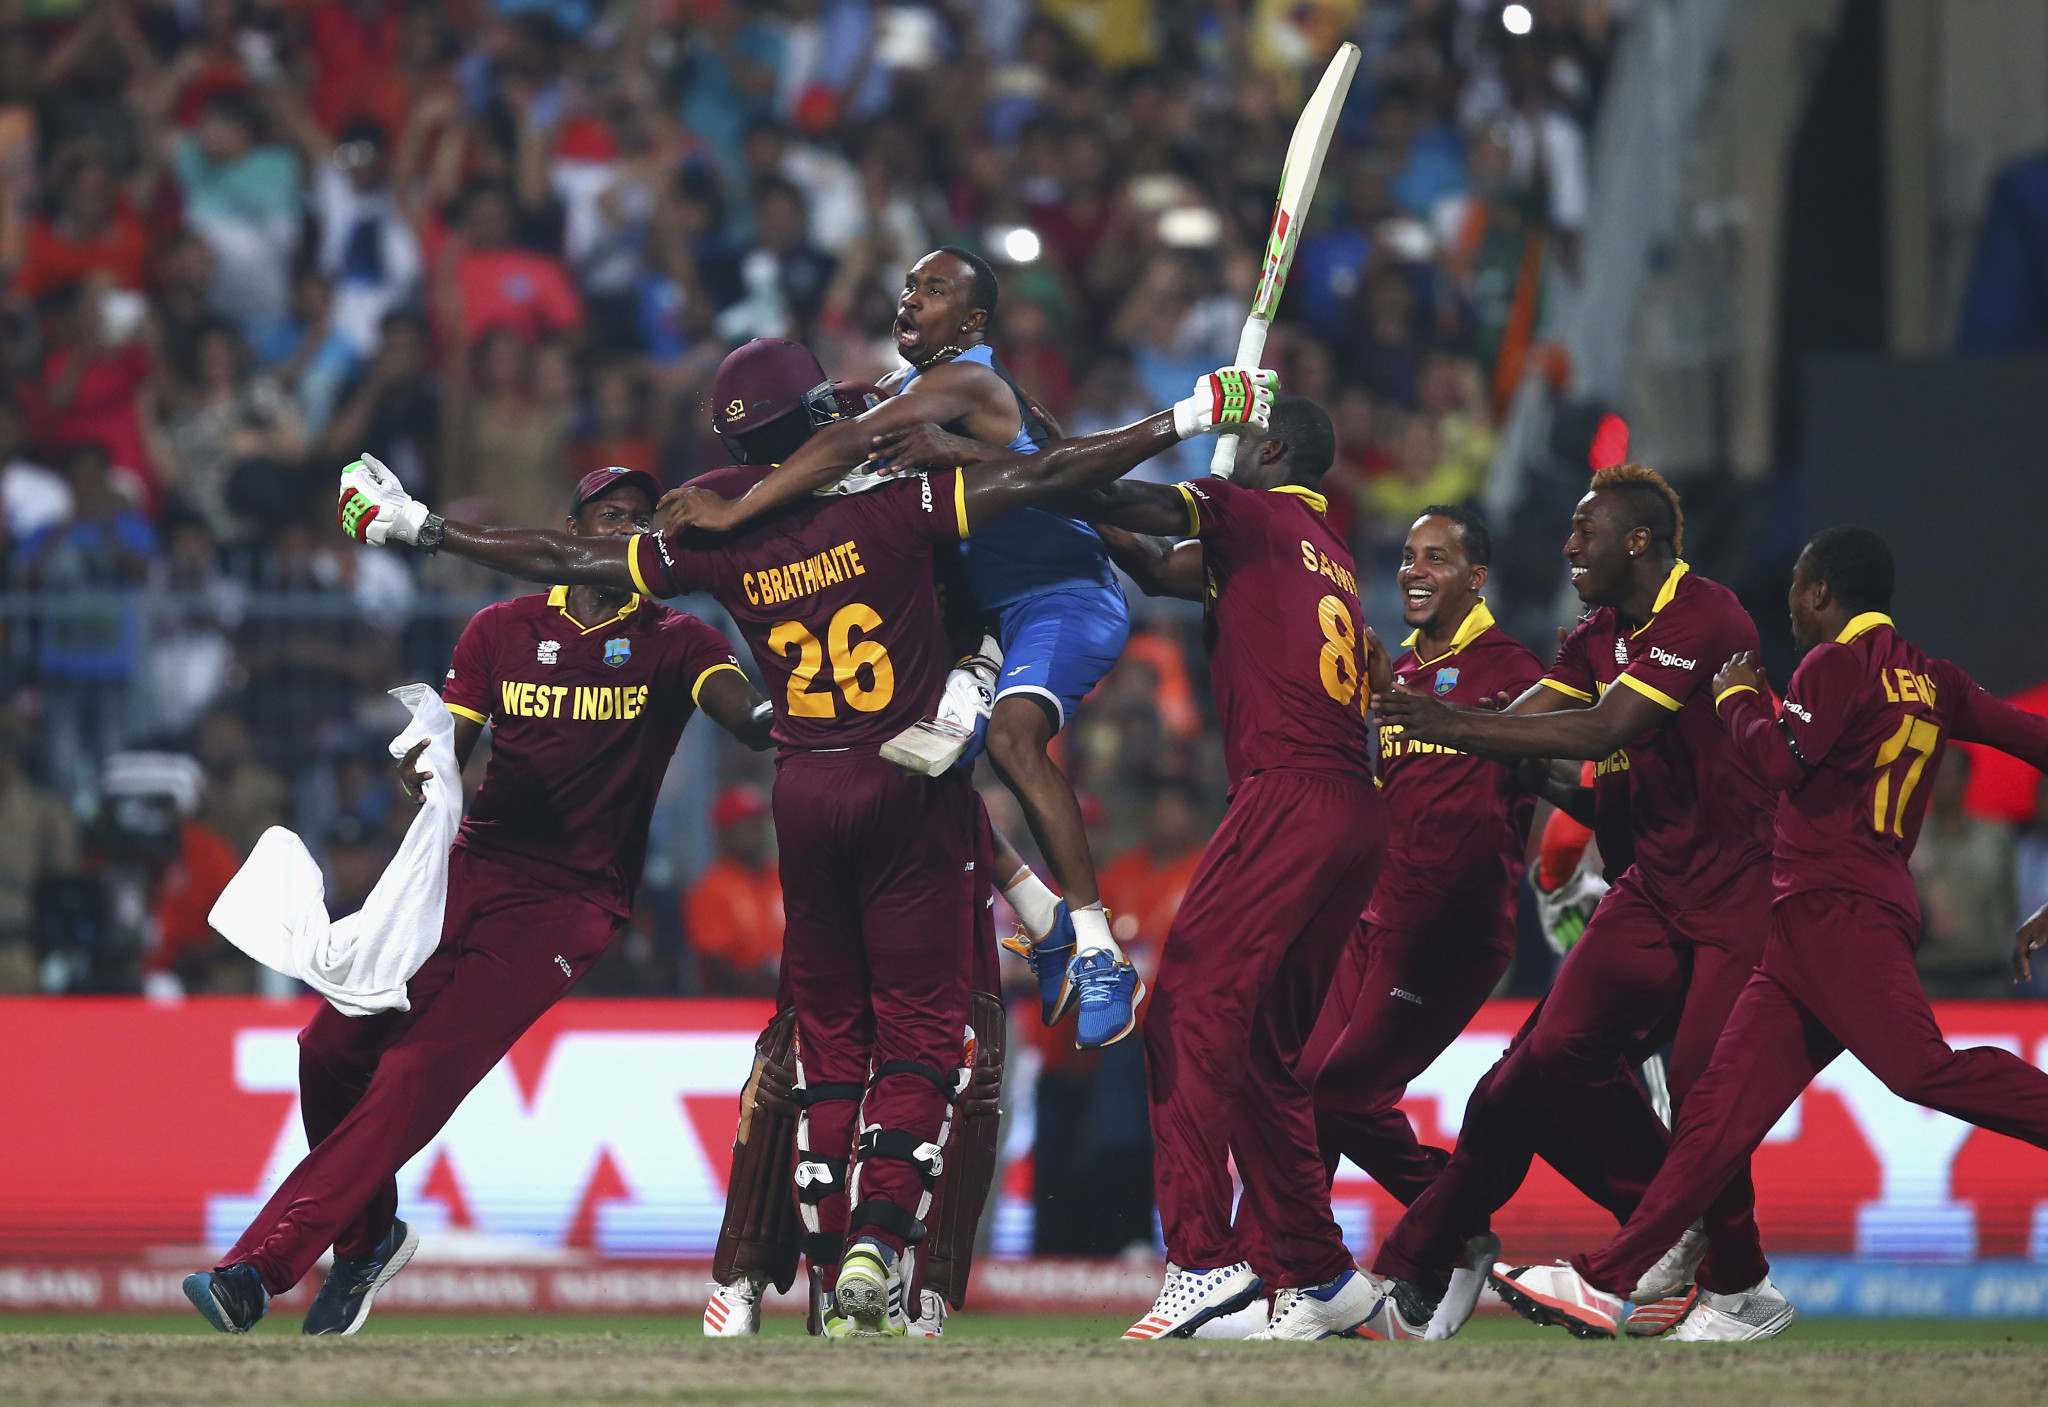 West Indies have twice won the ICC Men's T20 World Cup but will compete as individual nations when cricket returns to the Olympic programme at Los Angeles 2028 ©Getty Images (Image obtained at insidethegames.biz)